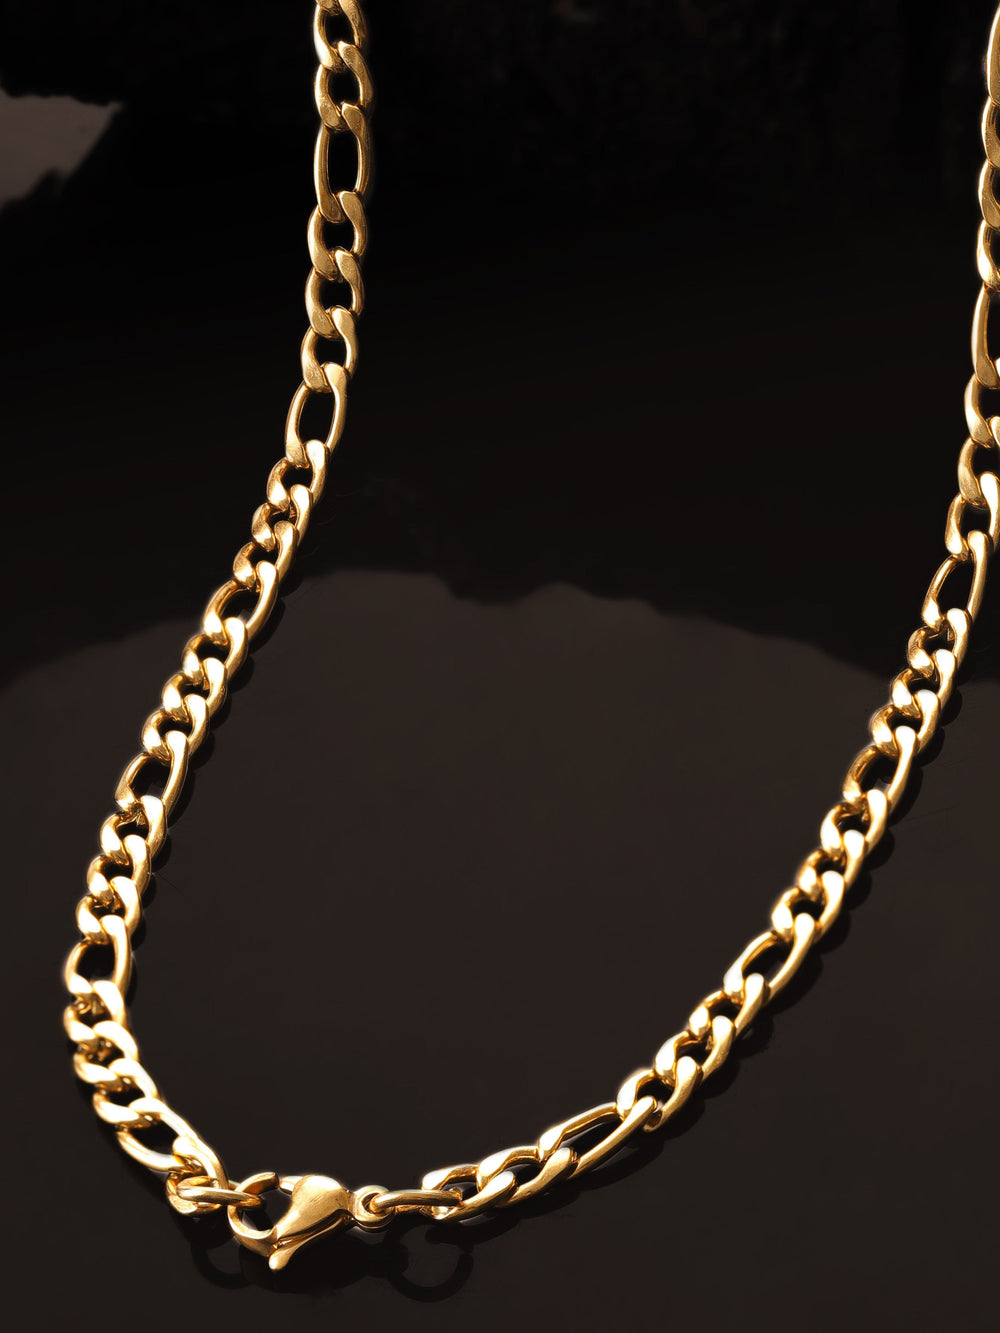 Rubans Voguish Men 18KT Linked Chain Necklace Necklace and Chains